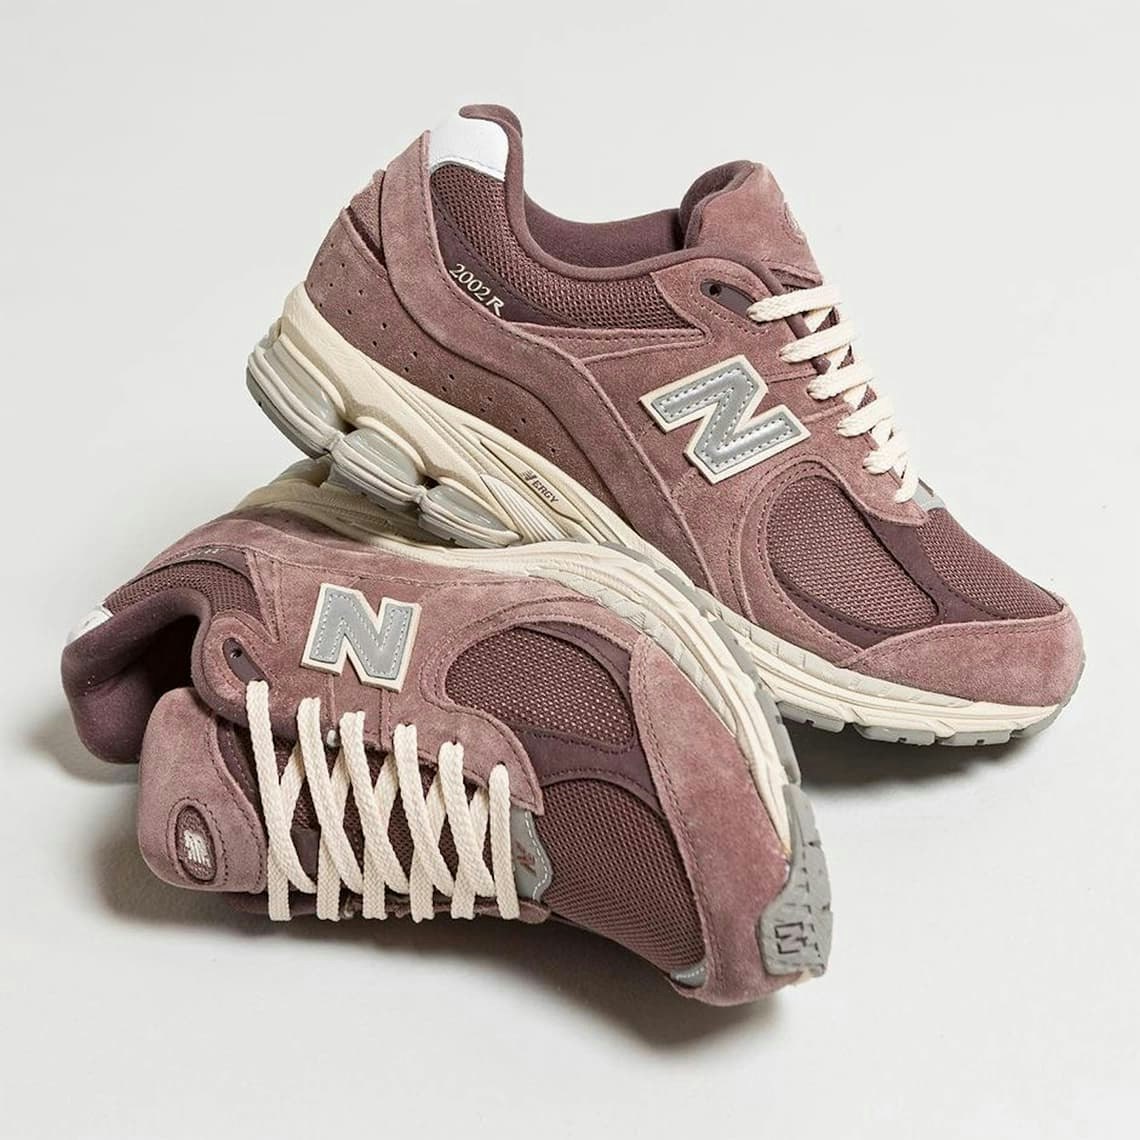 New Balance 2002R "Suede Pack"